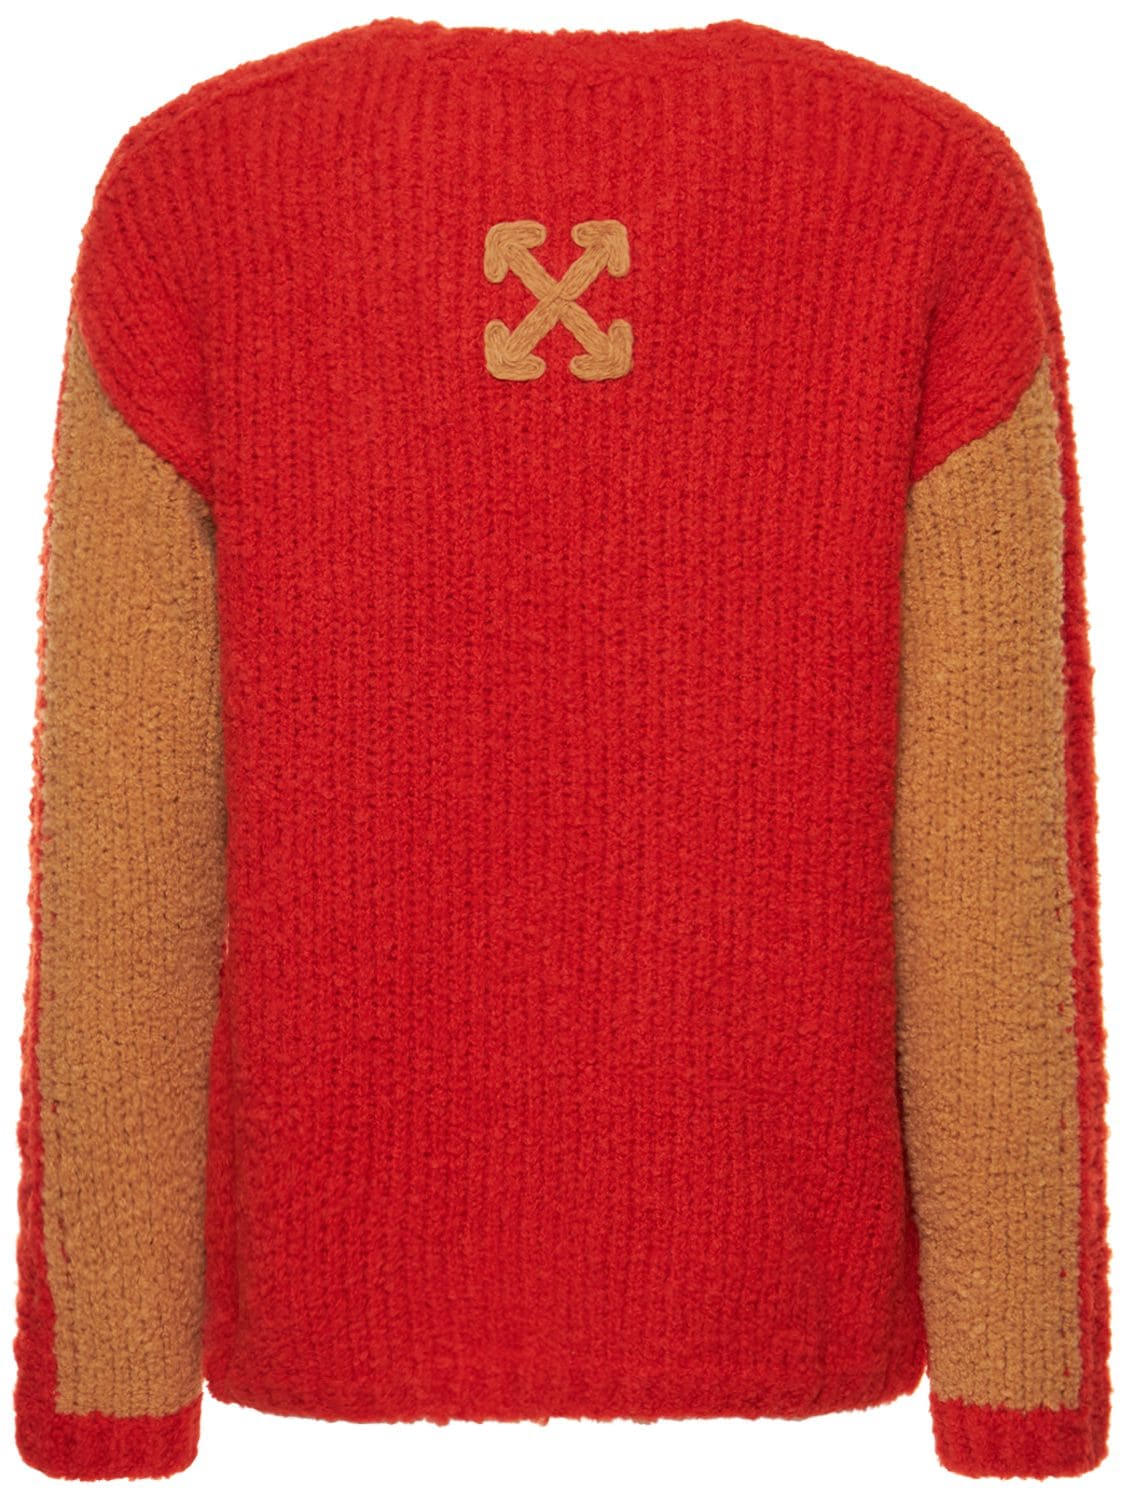 OFF-WHITE Wool Blend Knit Sweater